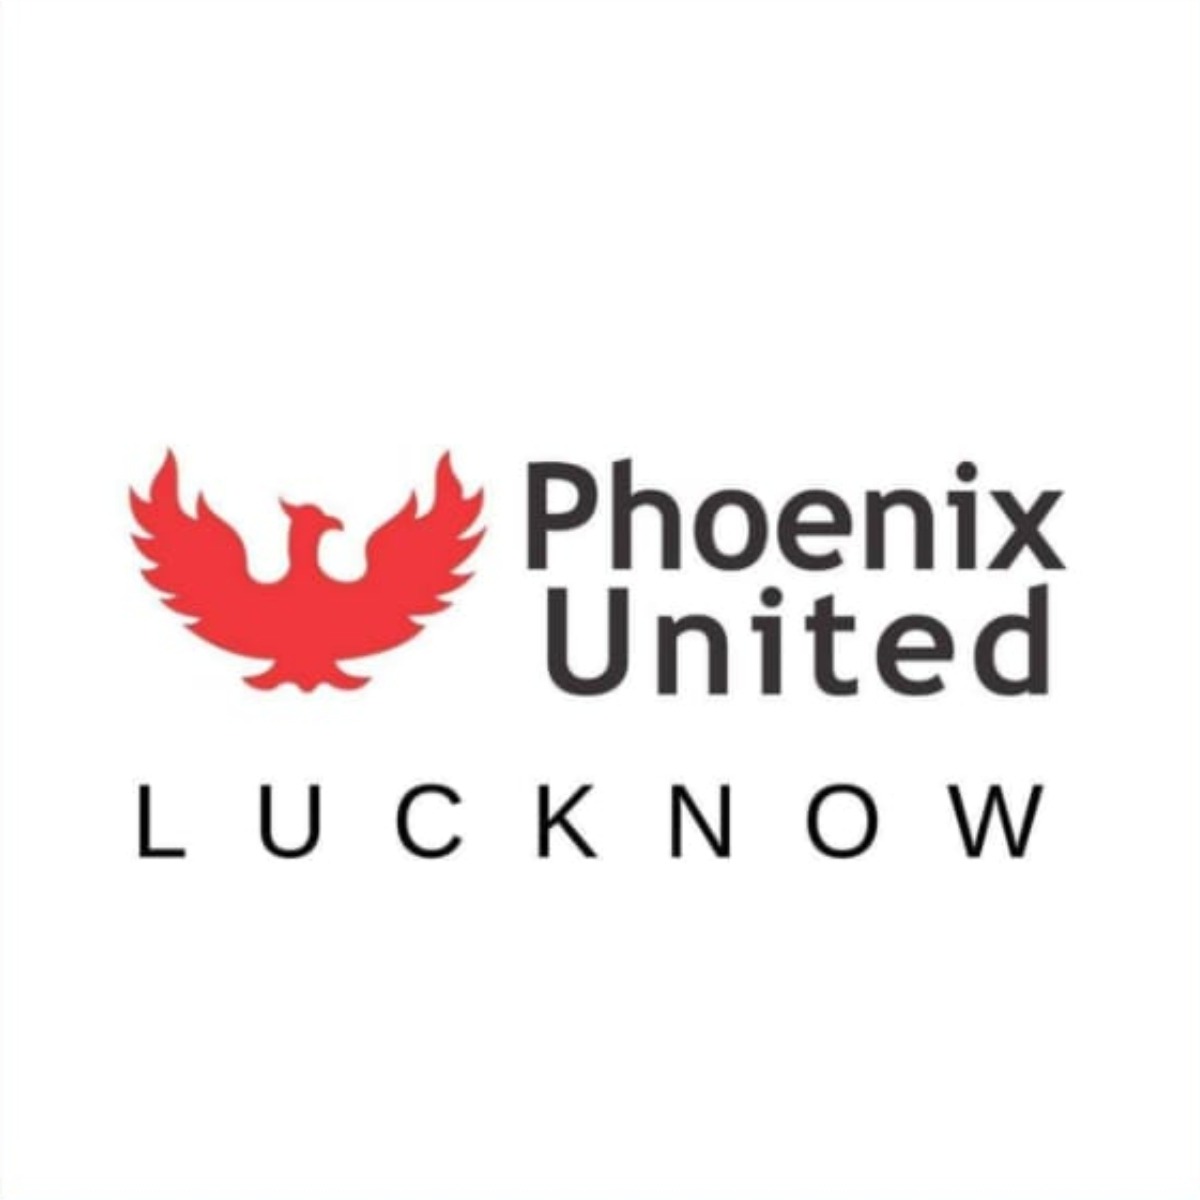 Phoenix United Lucknow presents attractive festival offers and 'Phoenix United's Chef Wonder' competition to mark the beiginning of festivals